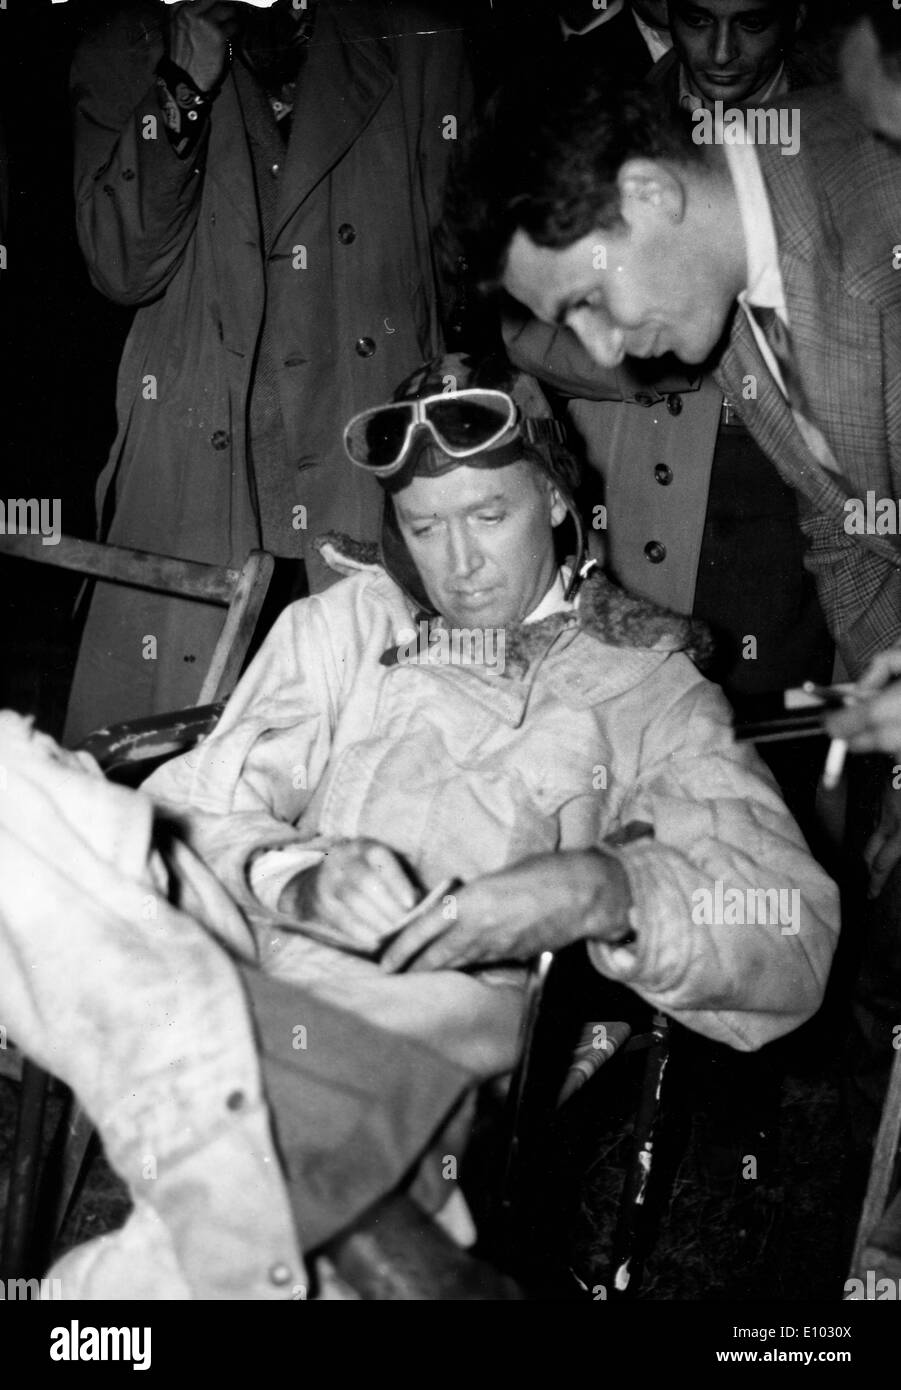 L'attore James Stewart come Charles Lindbergh in film Foto Stock